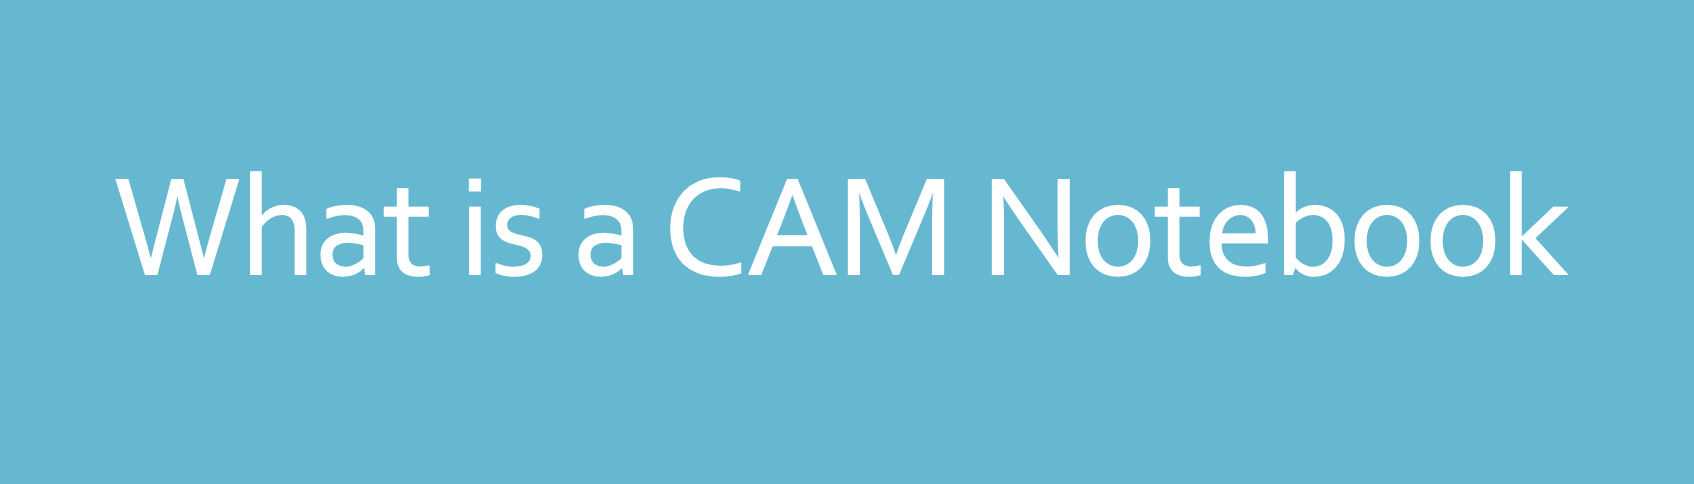 What is a CAM Notebook